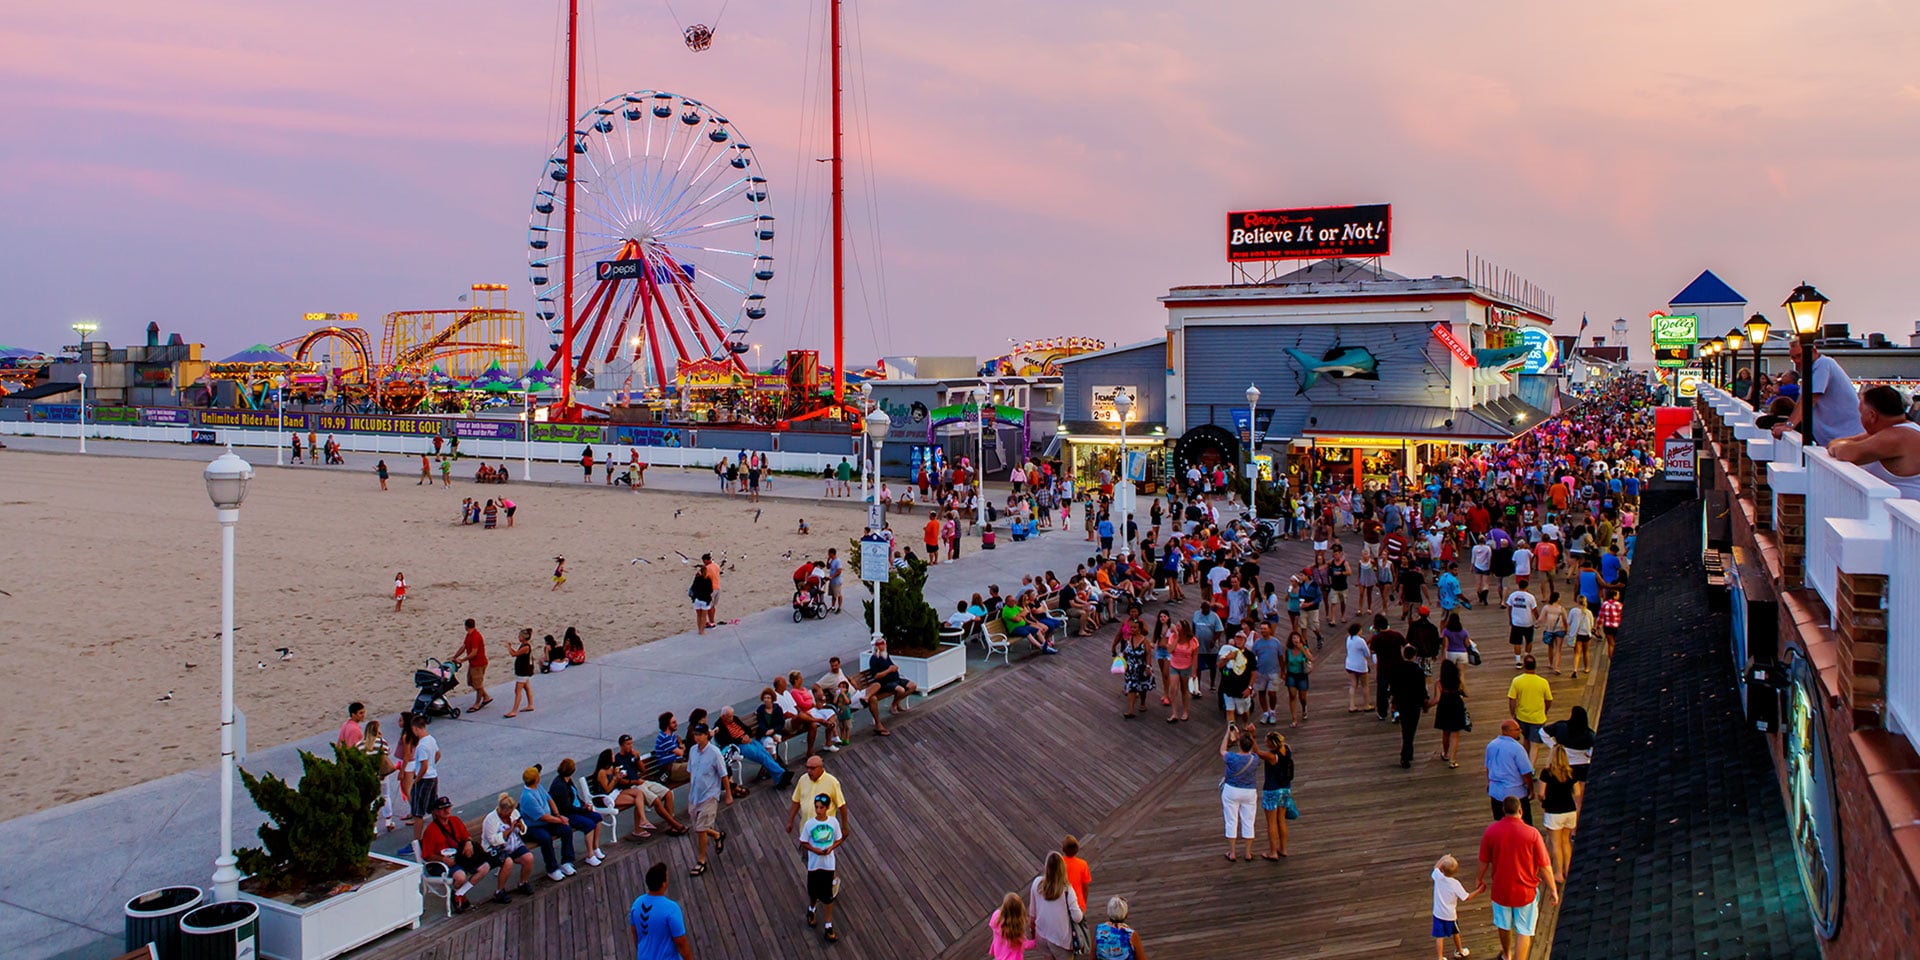 Boardwalk Bites and More How to See Ocean City, MD Like a Local